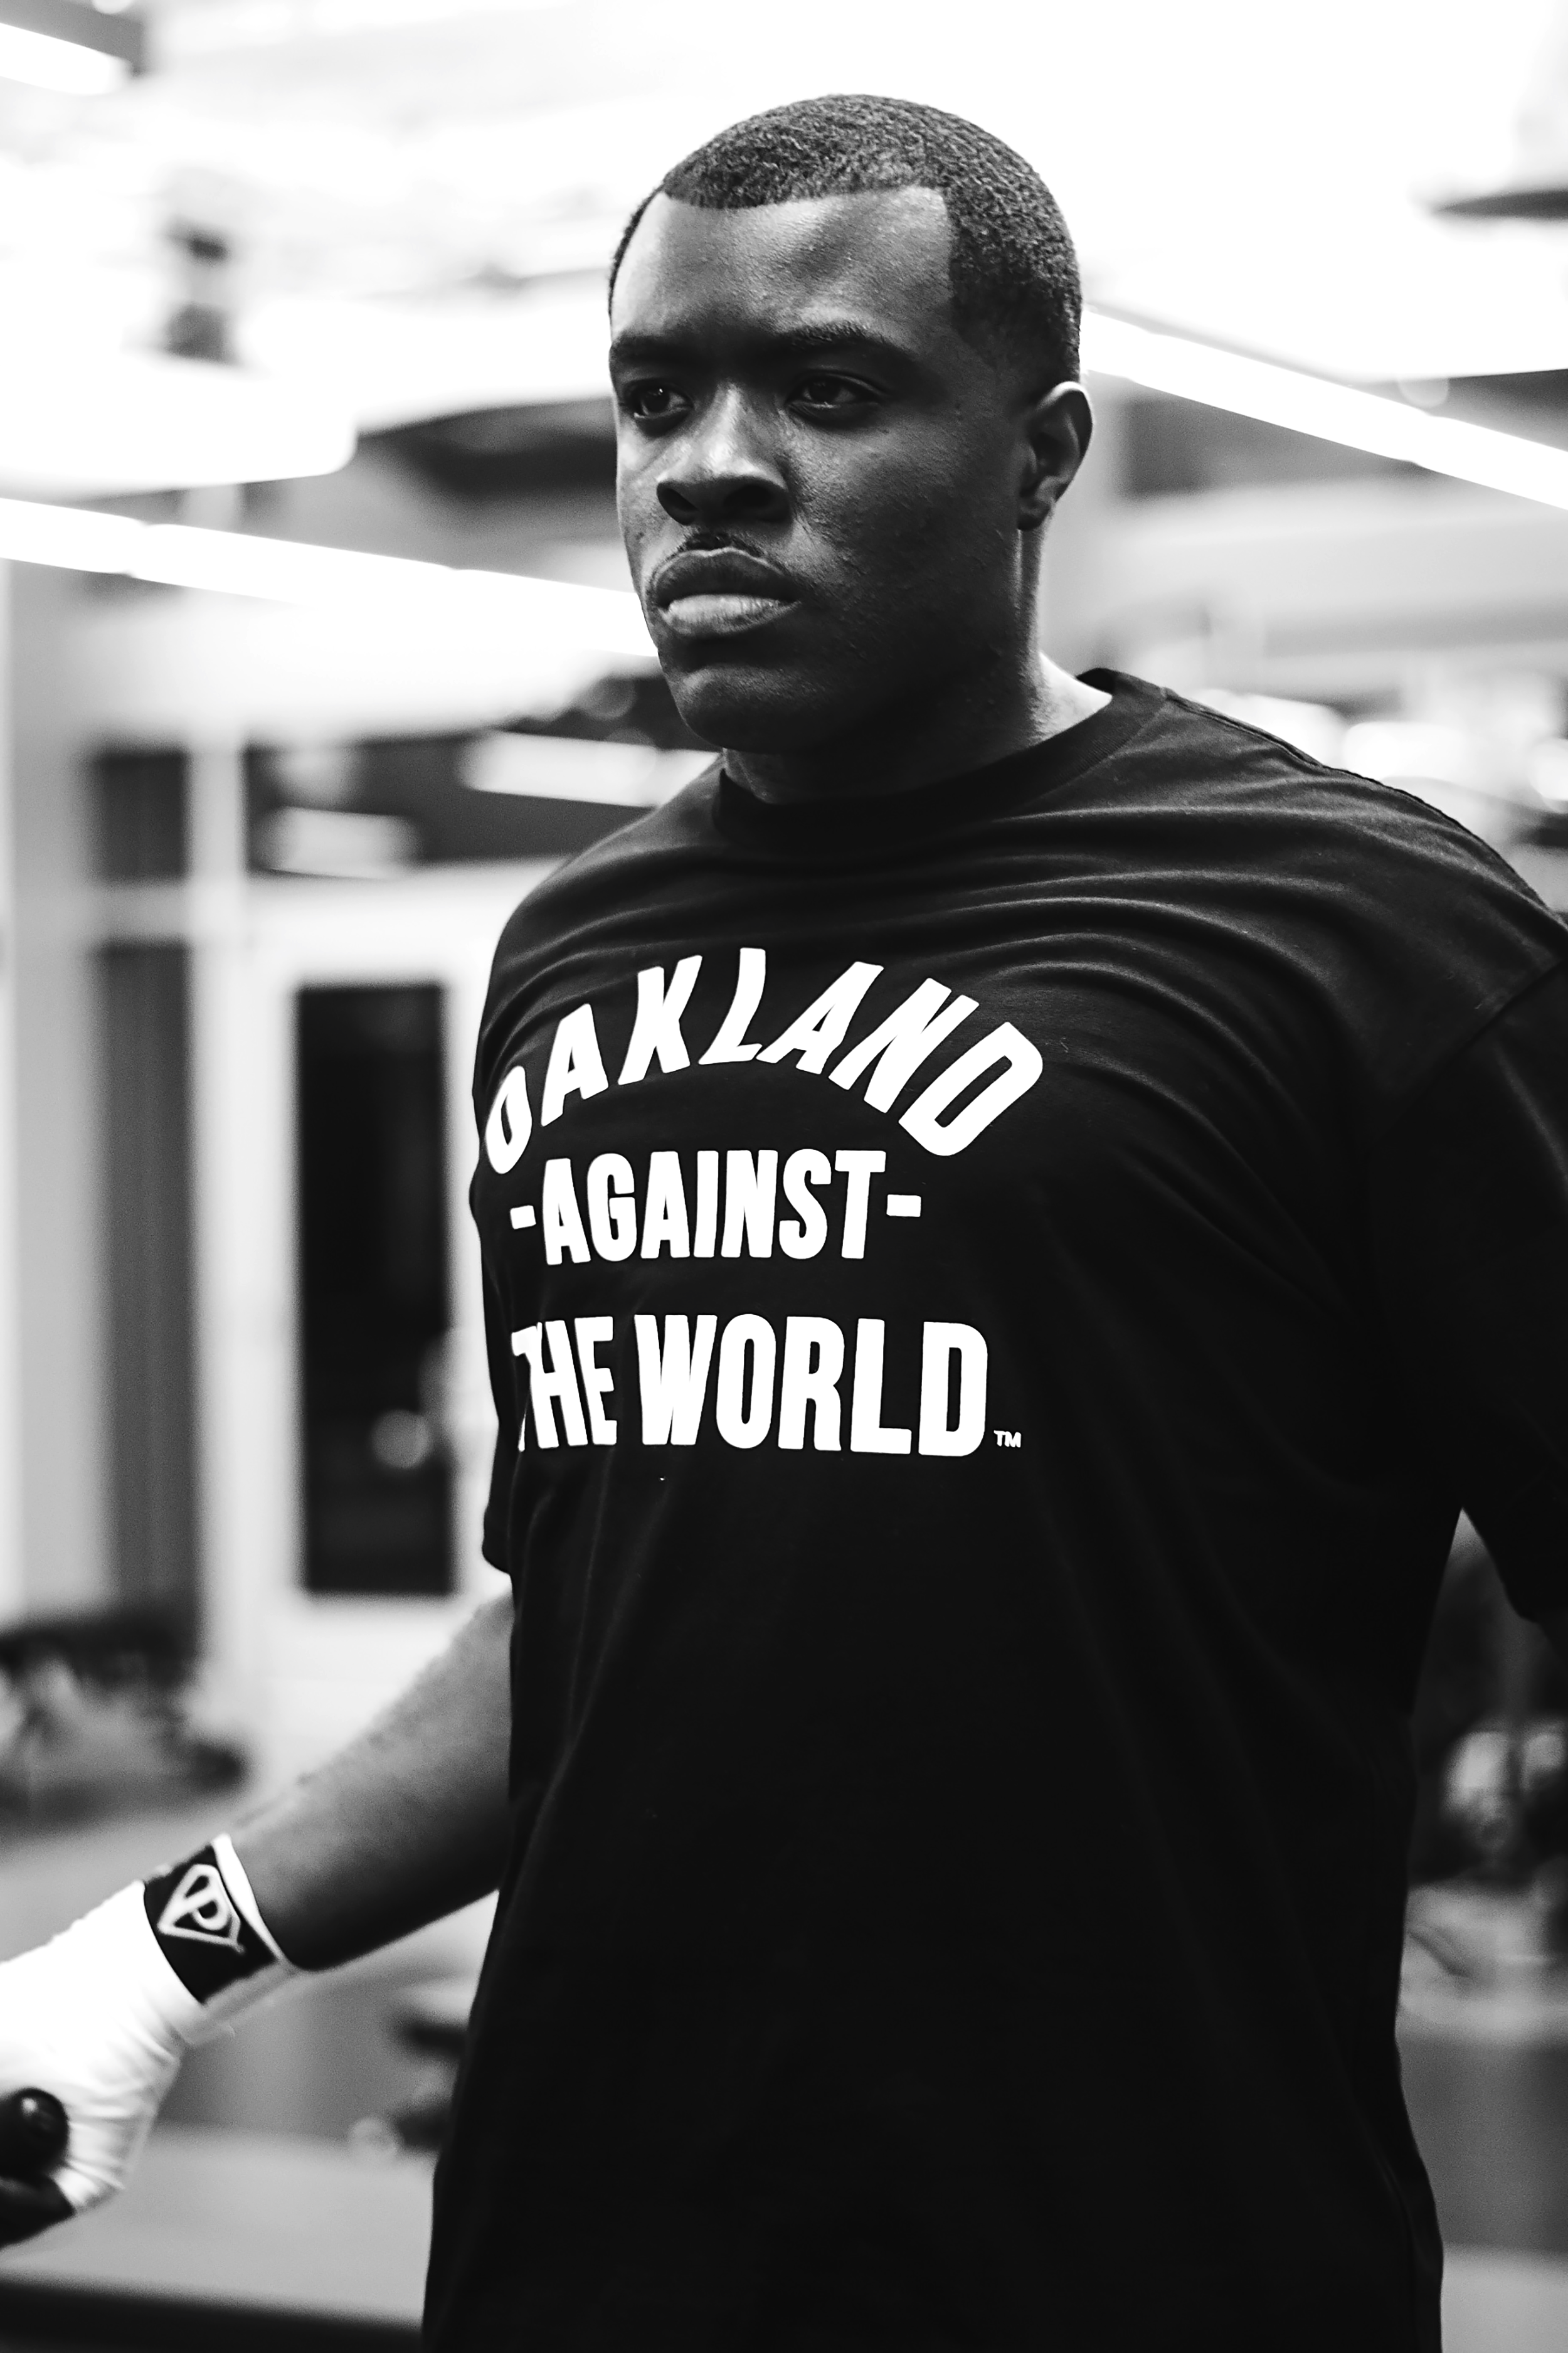 Sky Oak Co_Gallery_Oakland_Against_the_World_black_mens_tee.png